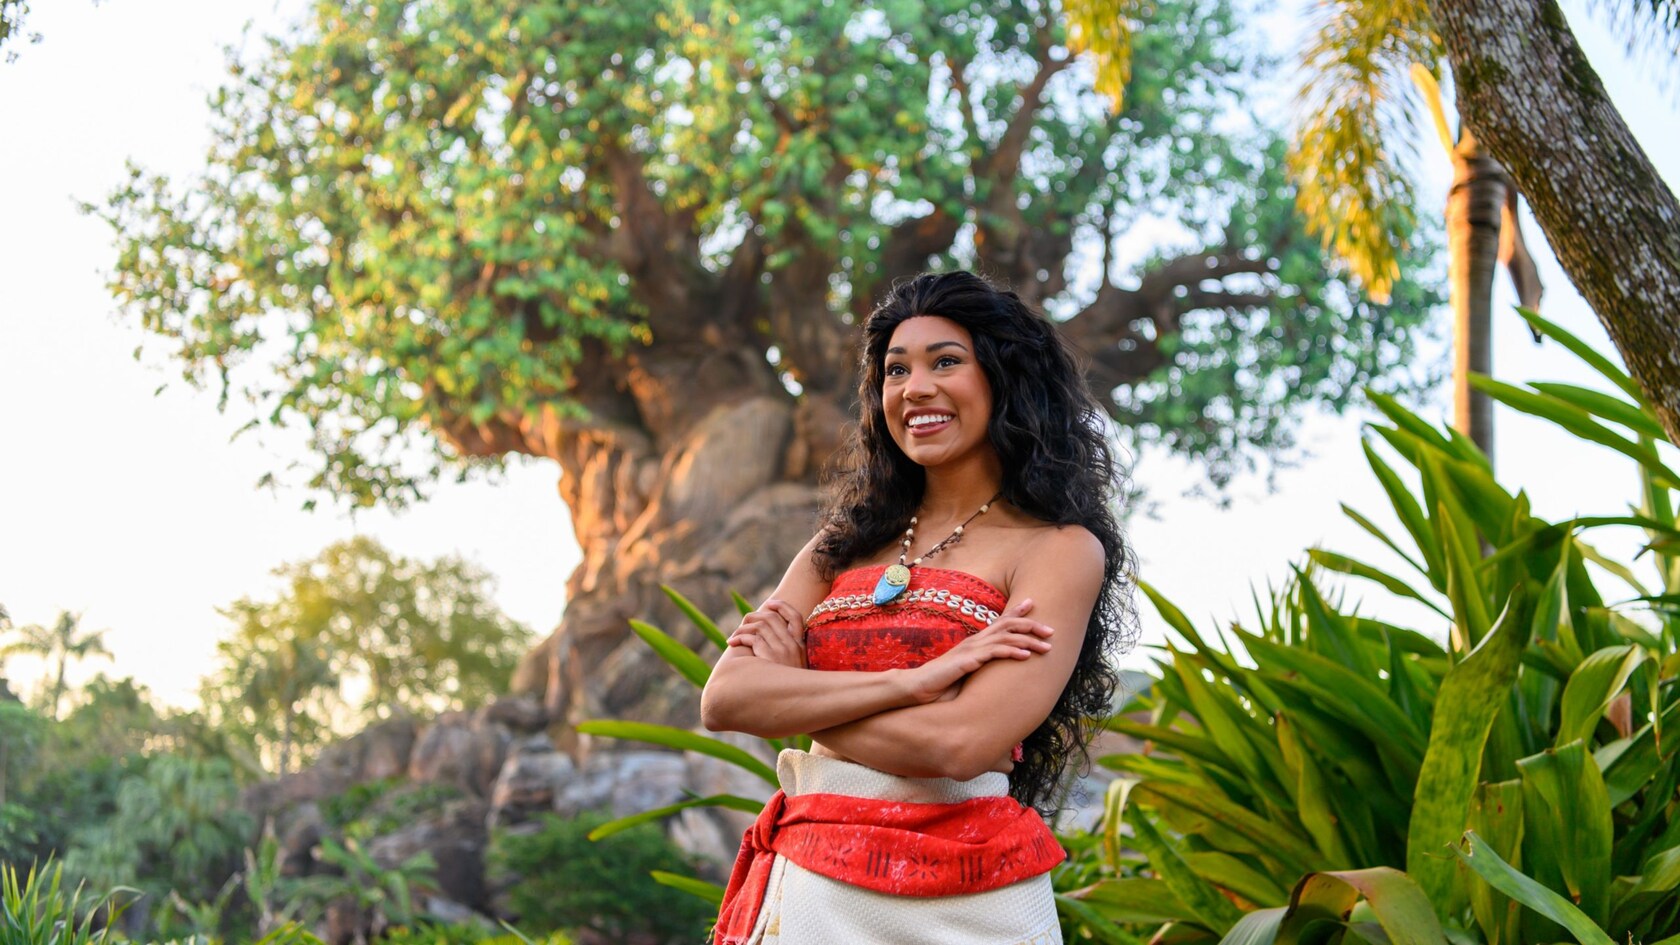 Moana smiles in front of the Tree of Life